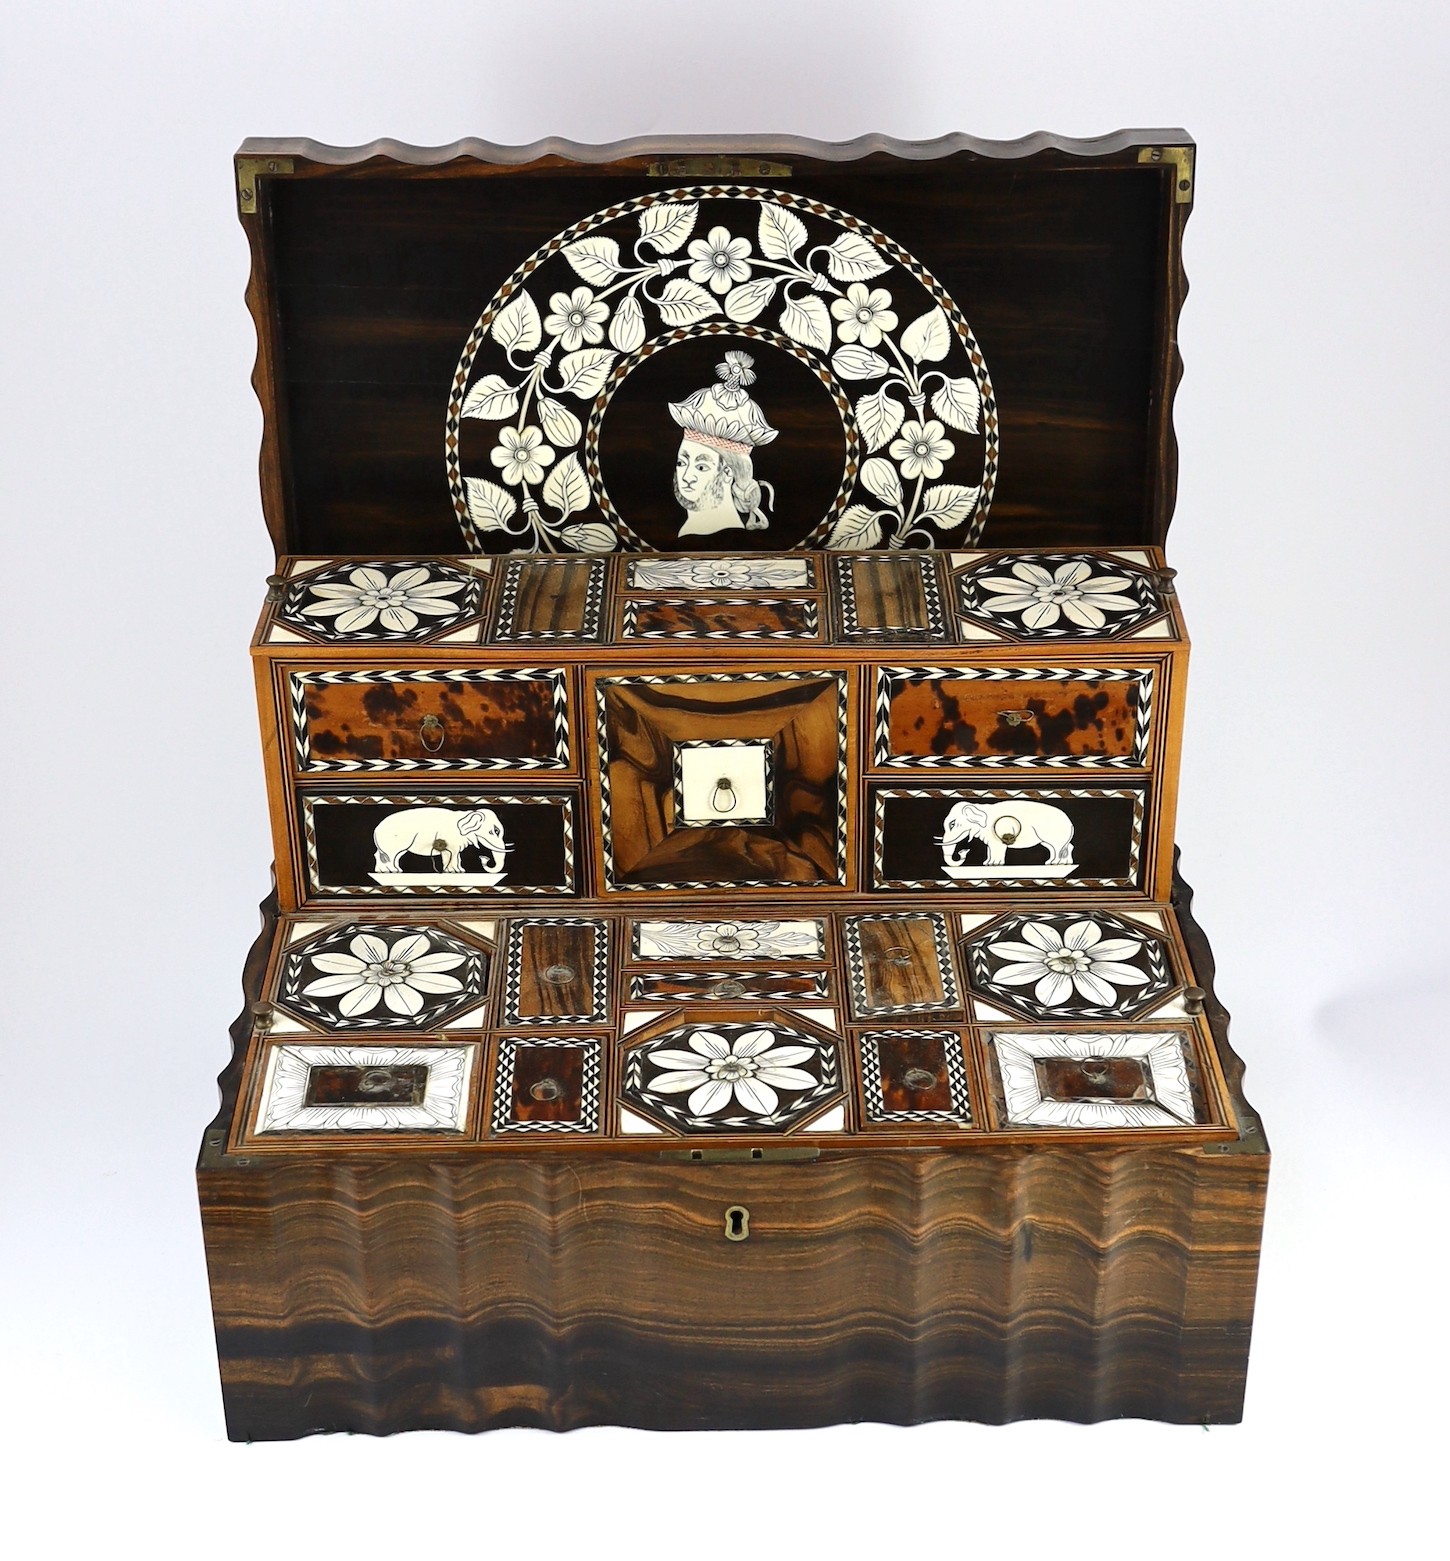 A mid 19th century Anglo Indian ivory inset ebony and other exotic hardwood travelling casket, 44cm wide 32cm deep 19cm high